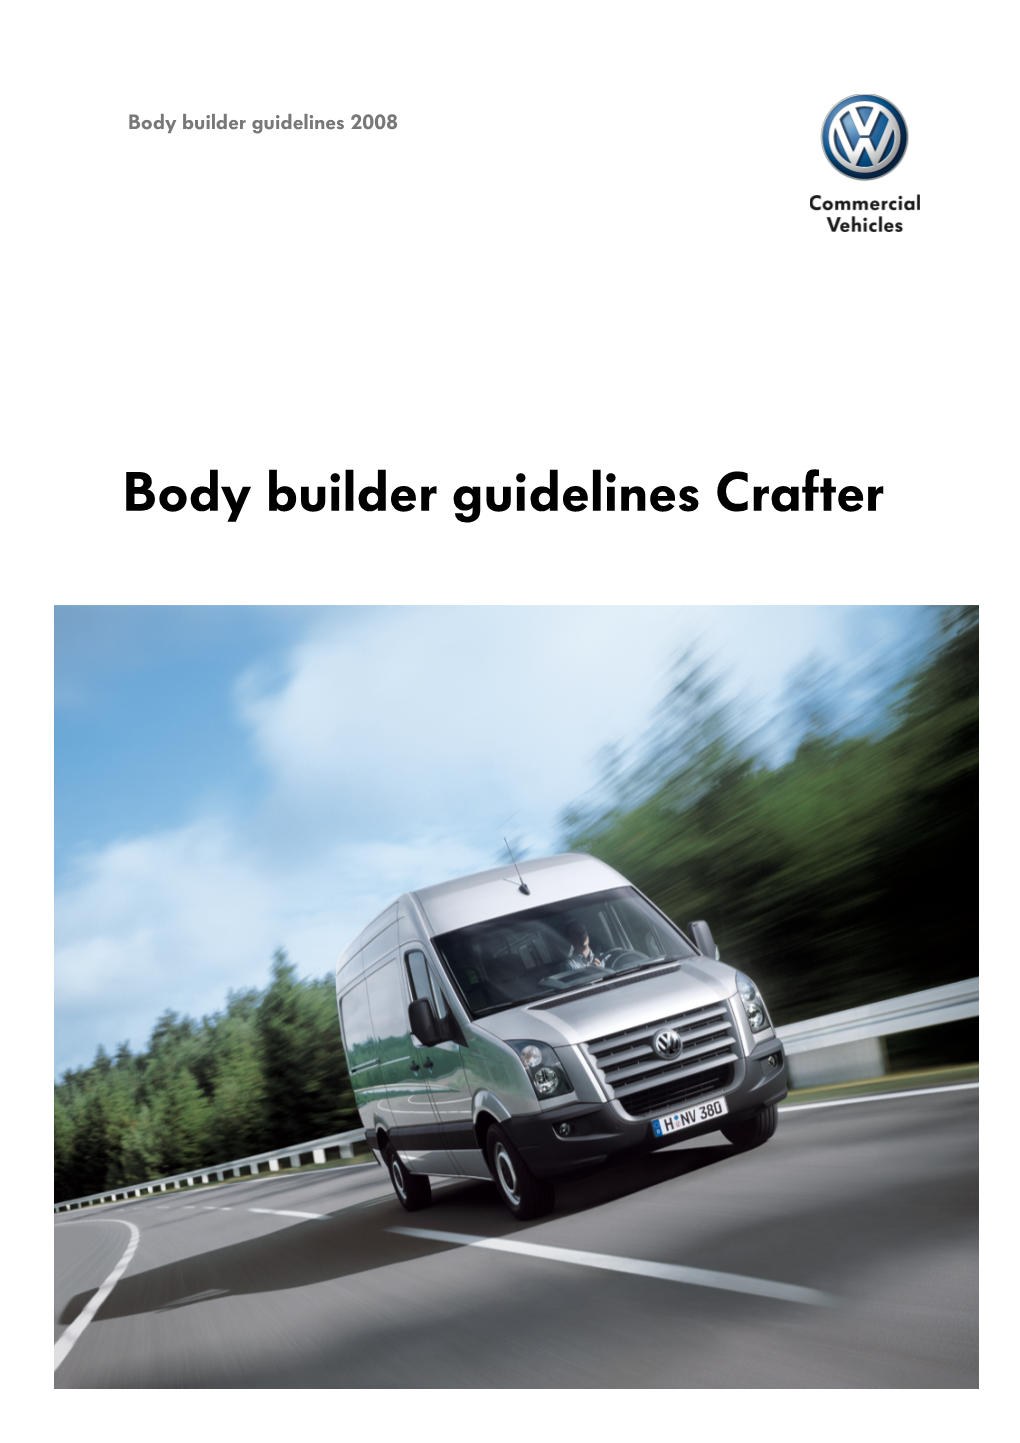 Body Builder Guidelines Crafter